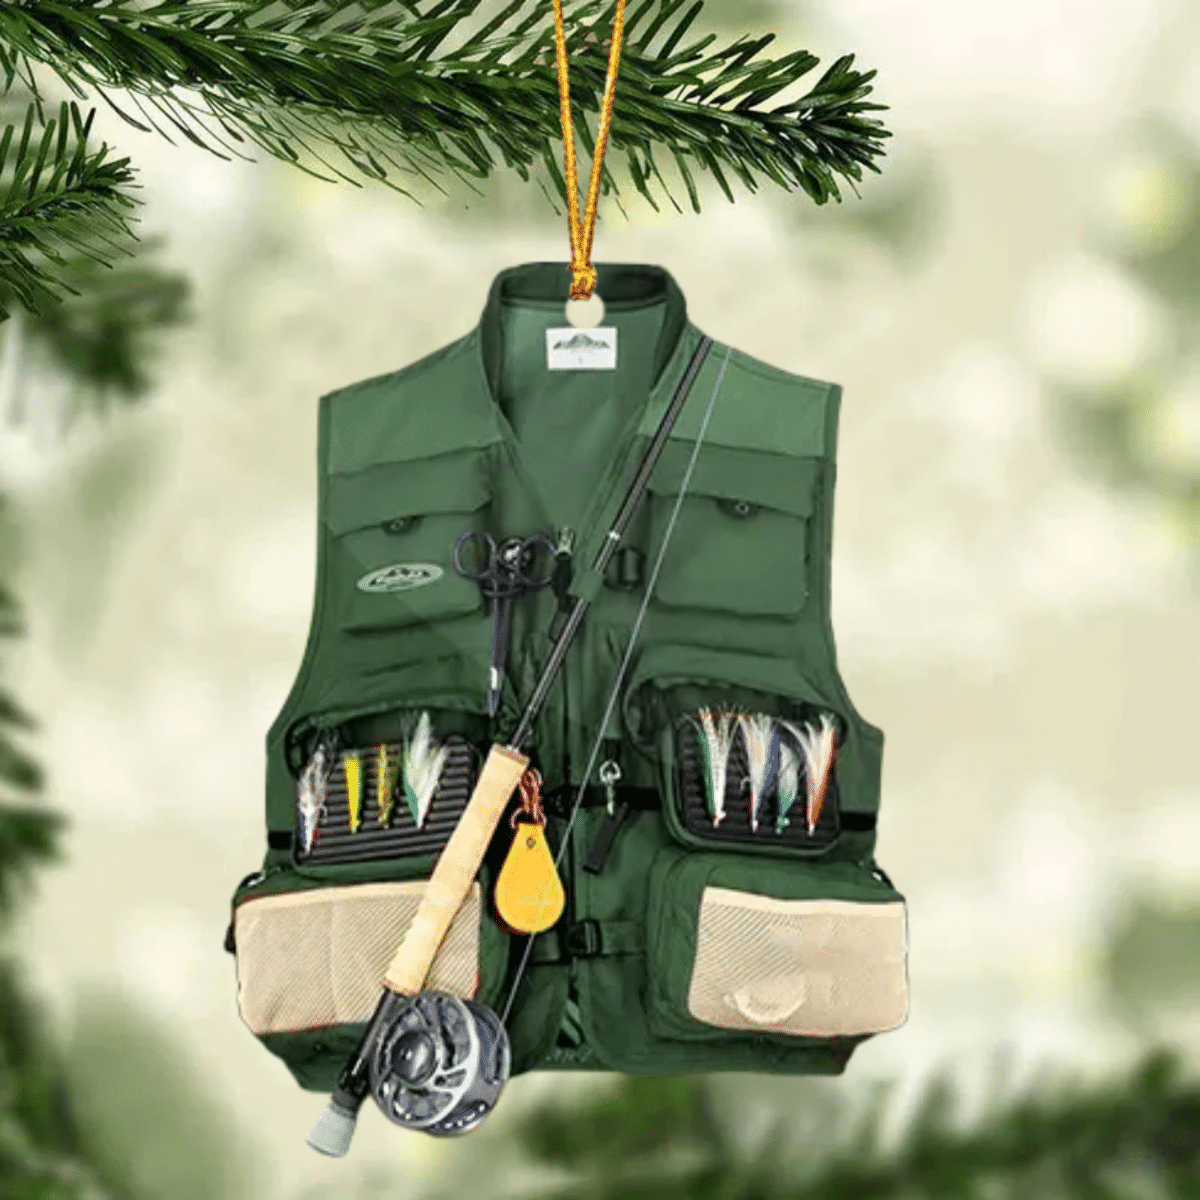 Fishing Vest With Christmas Light Personalized Ornament for Fishing Lovers/ Custom Name Fishing Ornament for Dad